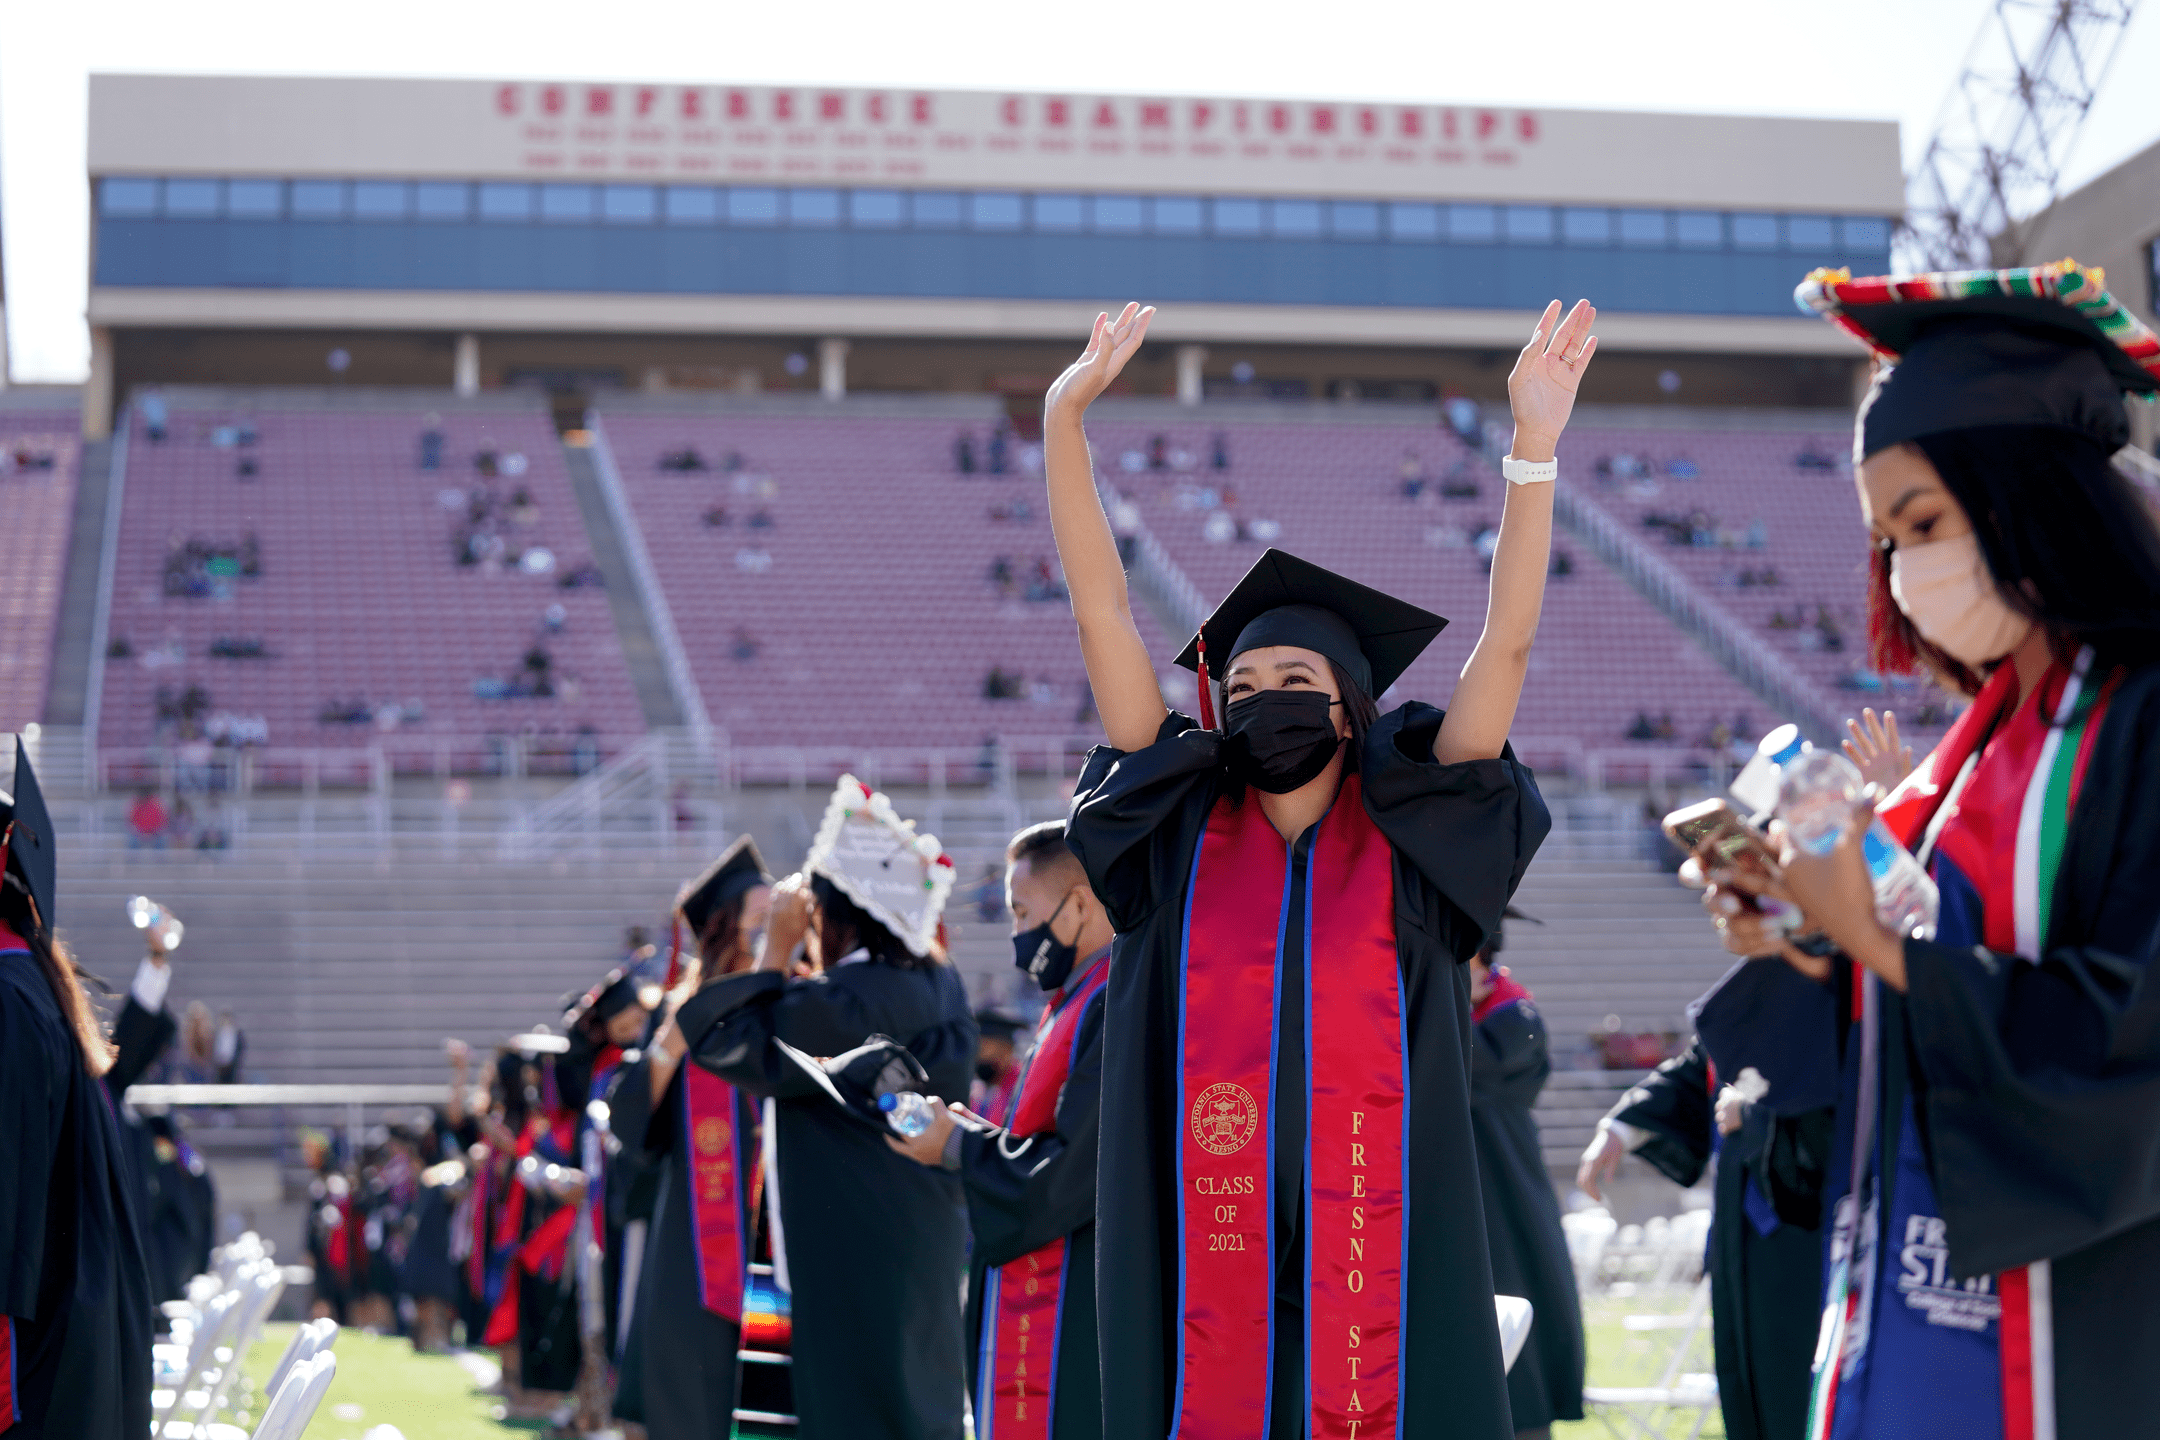 Student with mask and arms raised at graduation